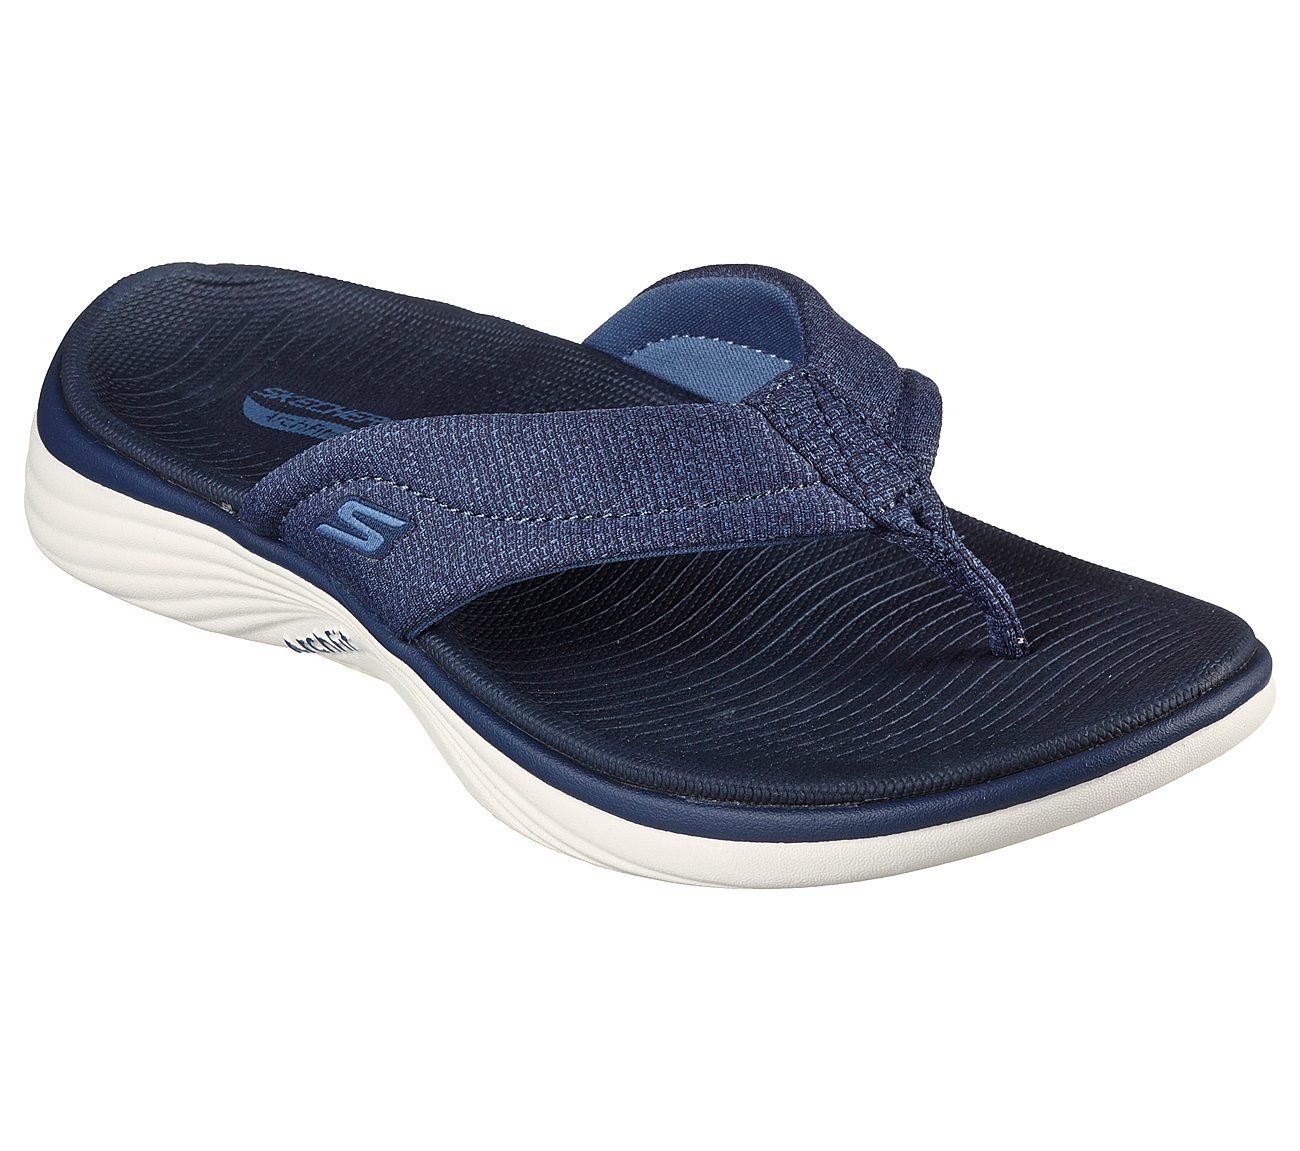 ARCH FIT RADIANCE - GLEAM, NNNAVY Footwear Lateral View